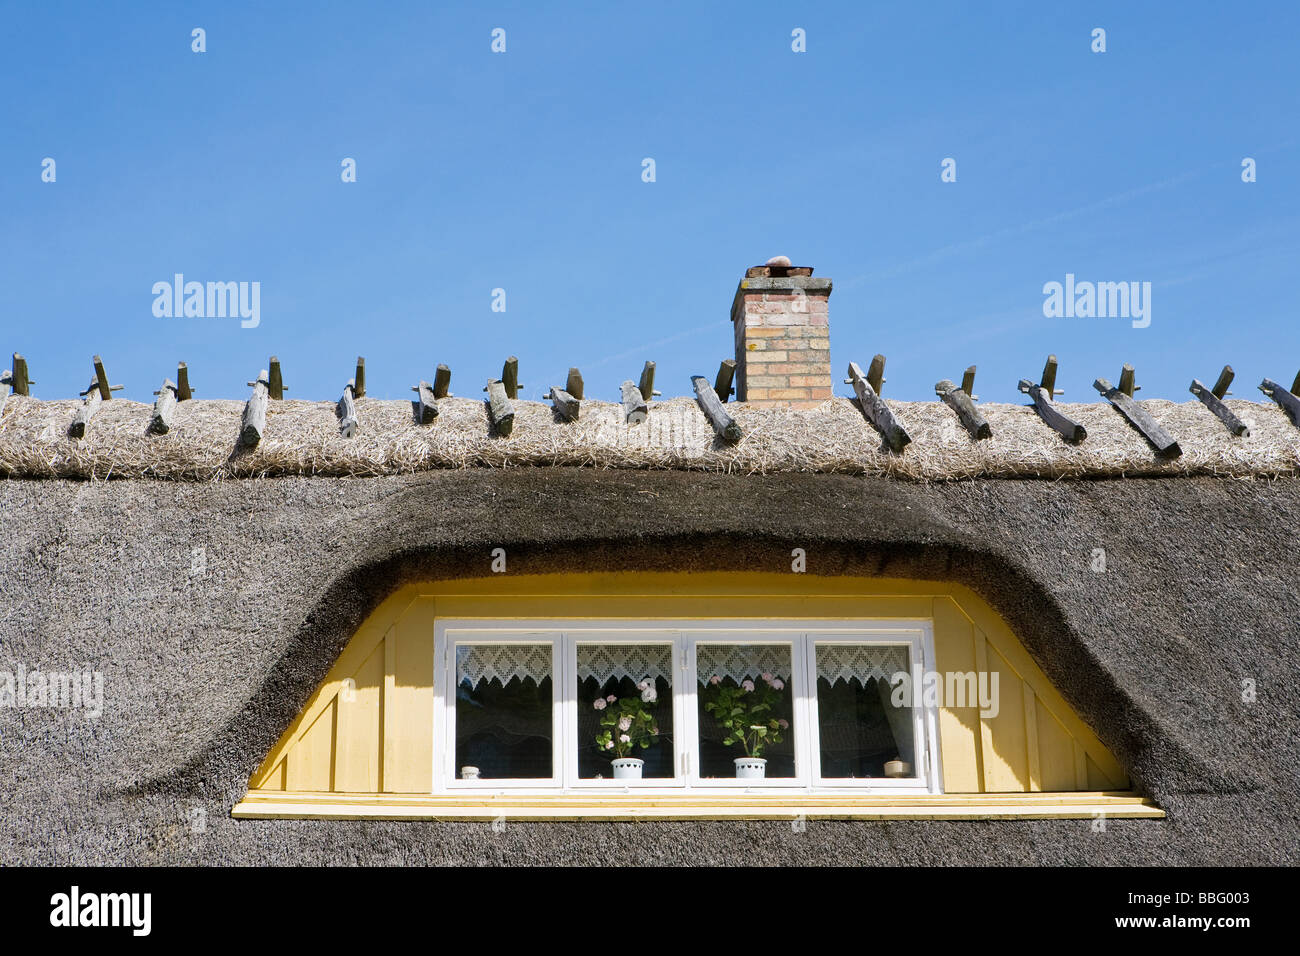 Thatched Dach eines Hauses Stockfoto